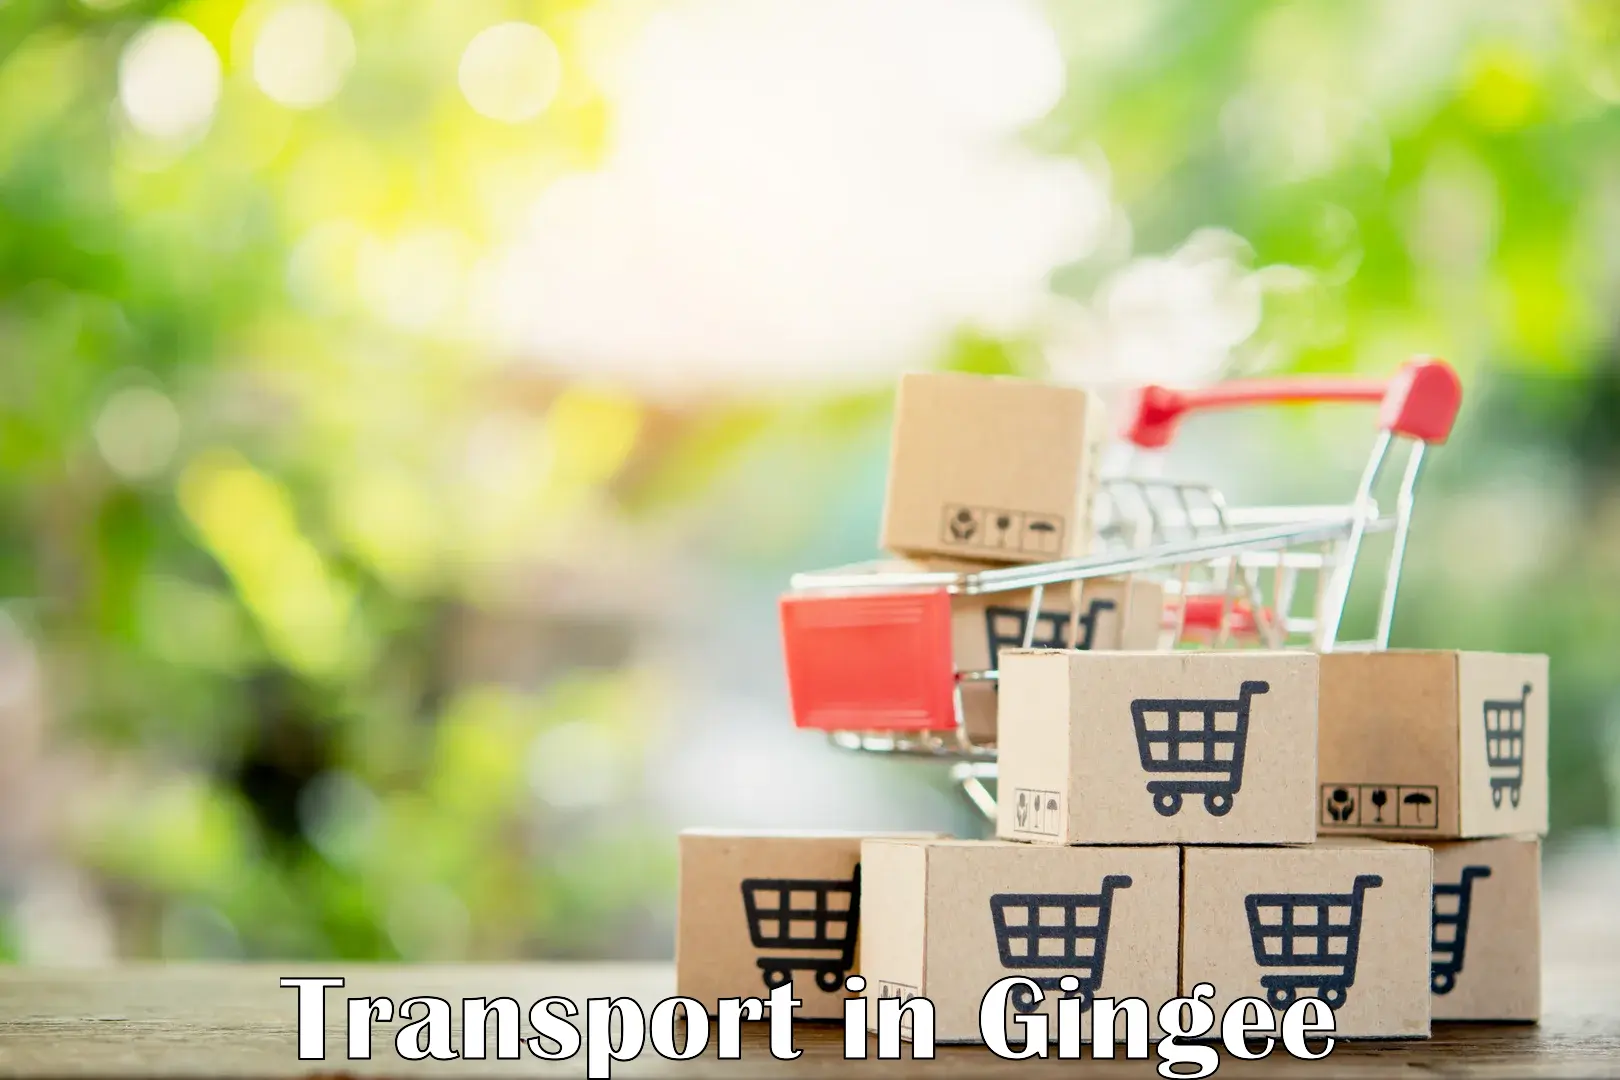 Transport in sharing in Gingee